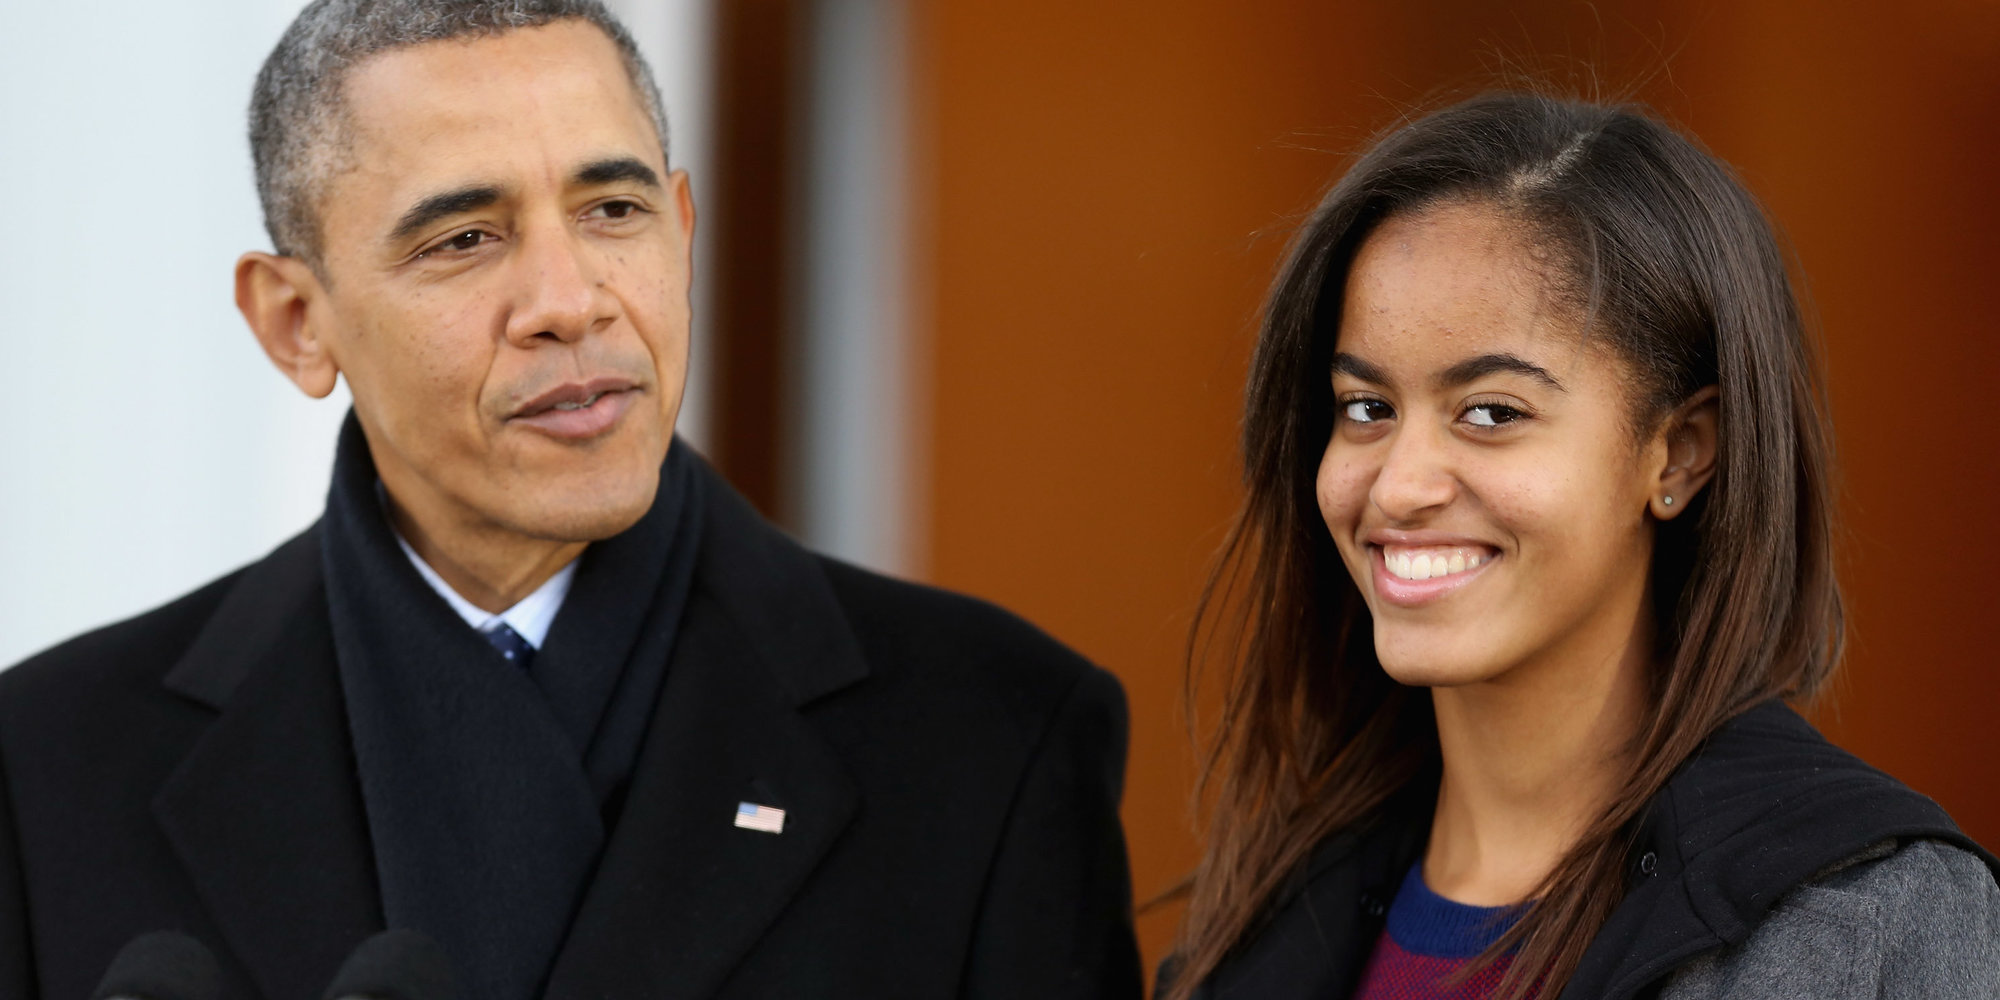 Should Malia Obama Serve Jail Time Like Everyone Else For Smoking Weed Illegally?